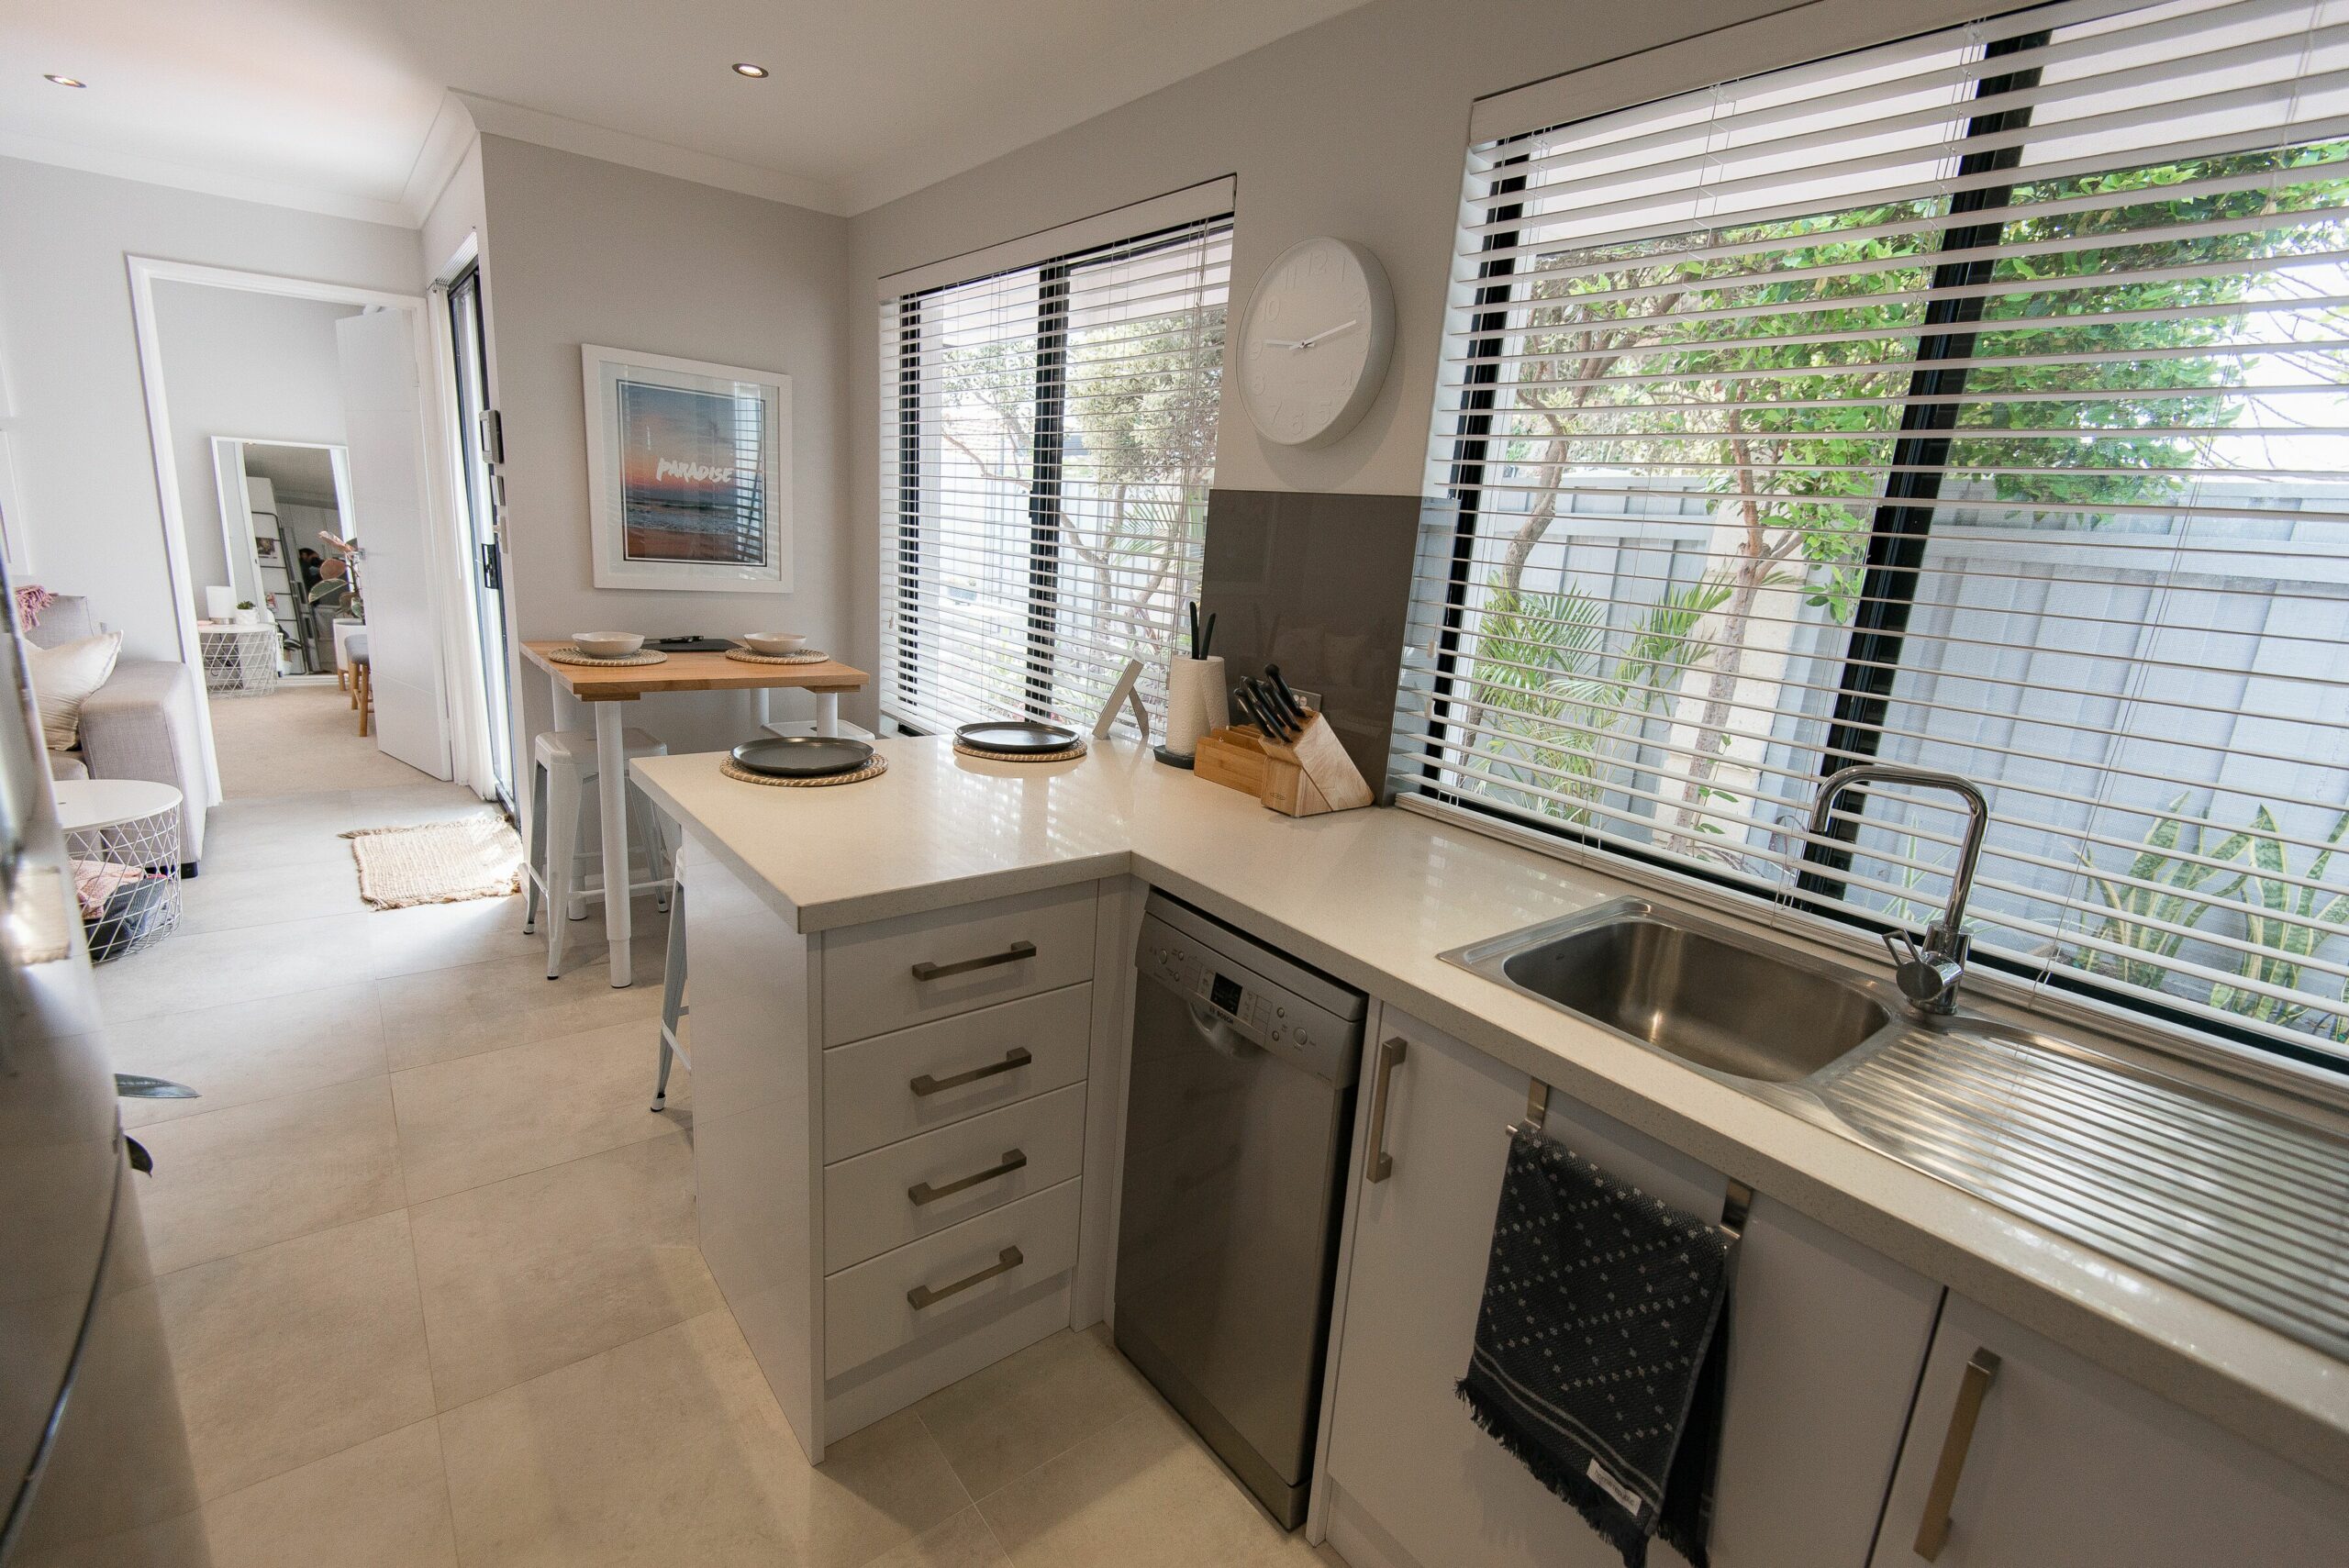 Private Mindarie Retreat With Garden Views, Walking Distance to Marina & Shops